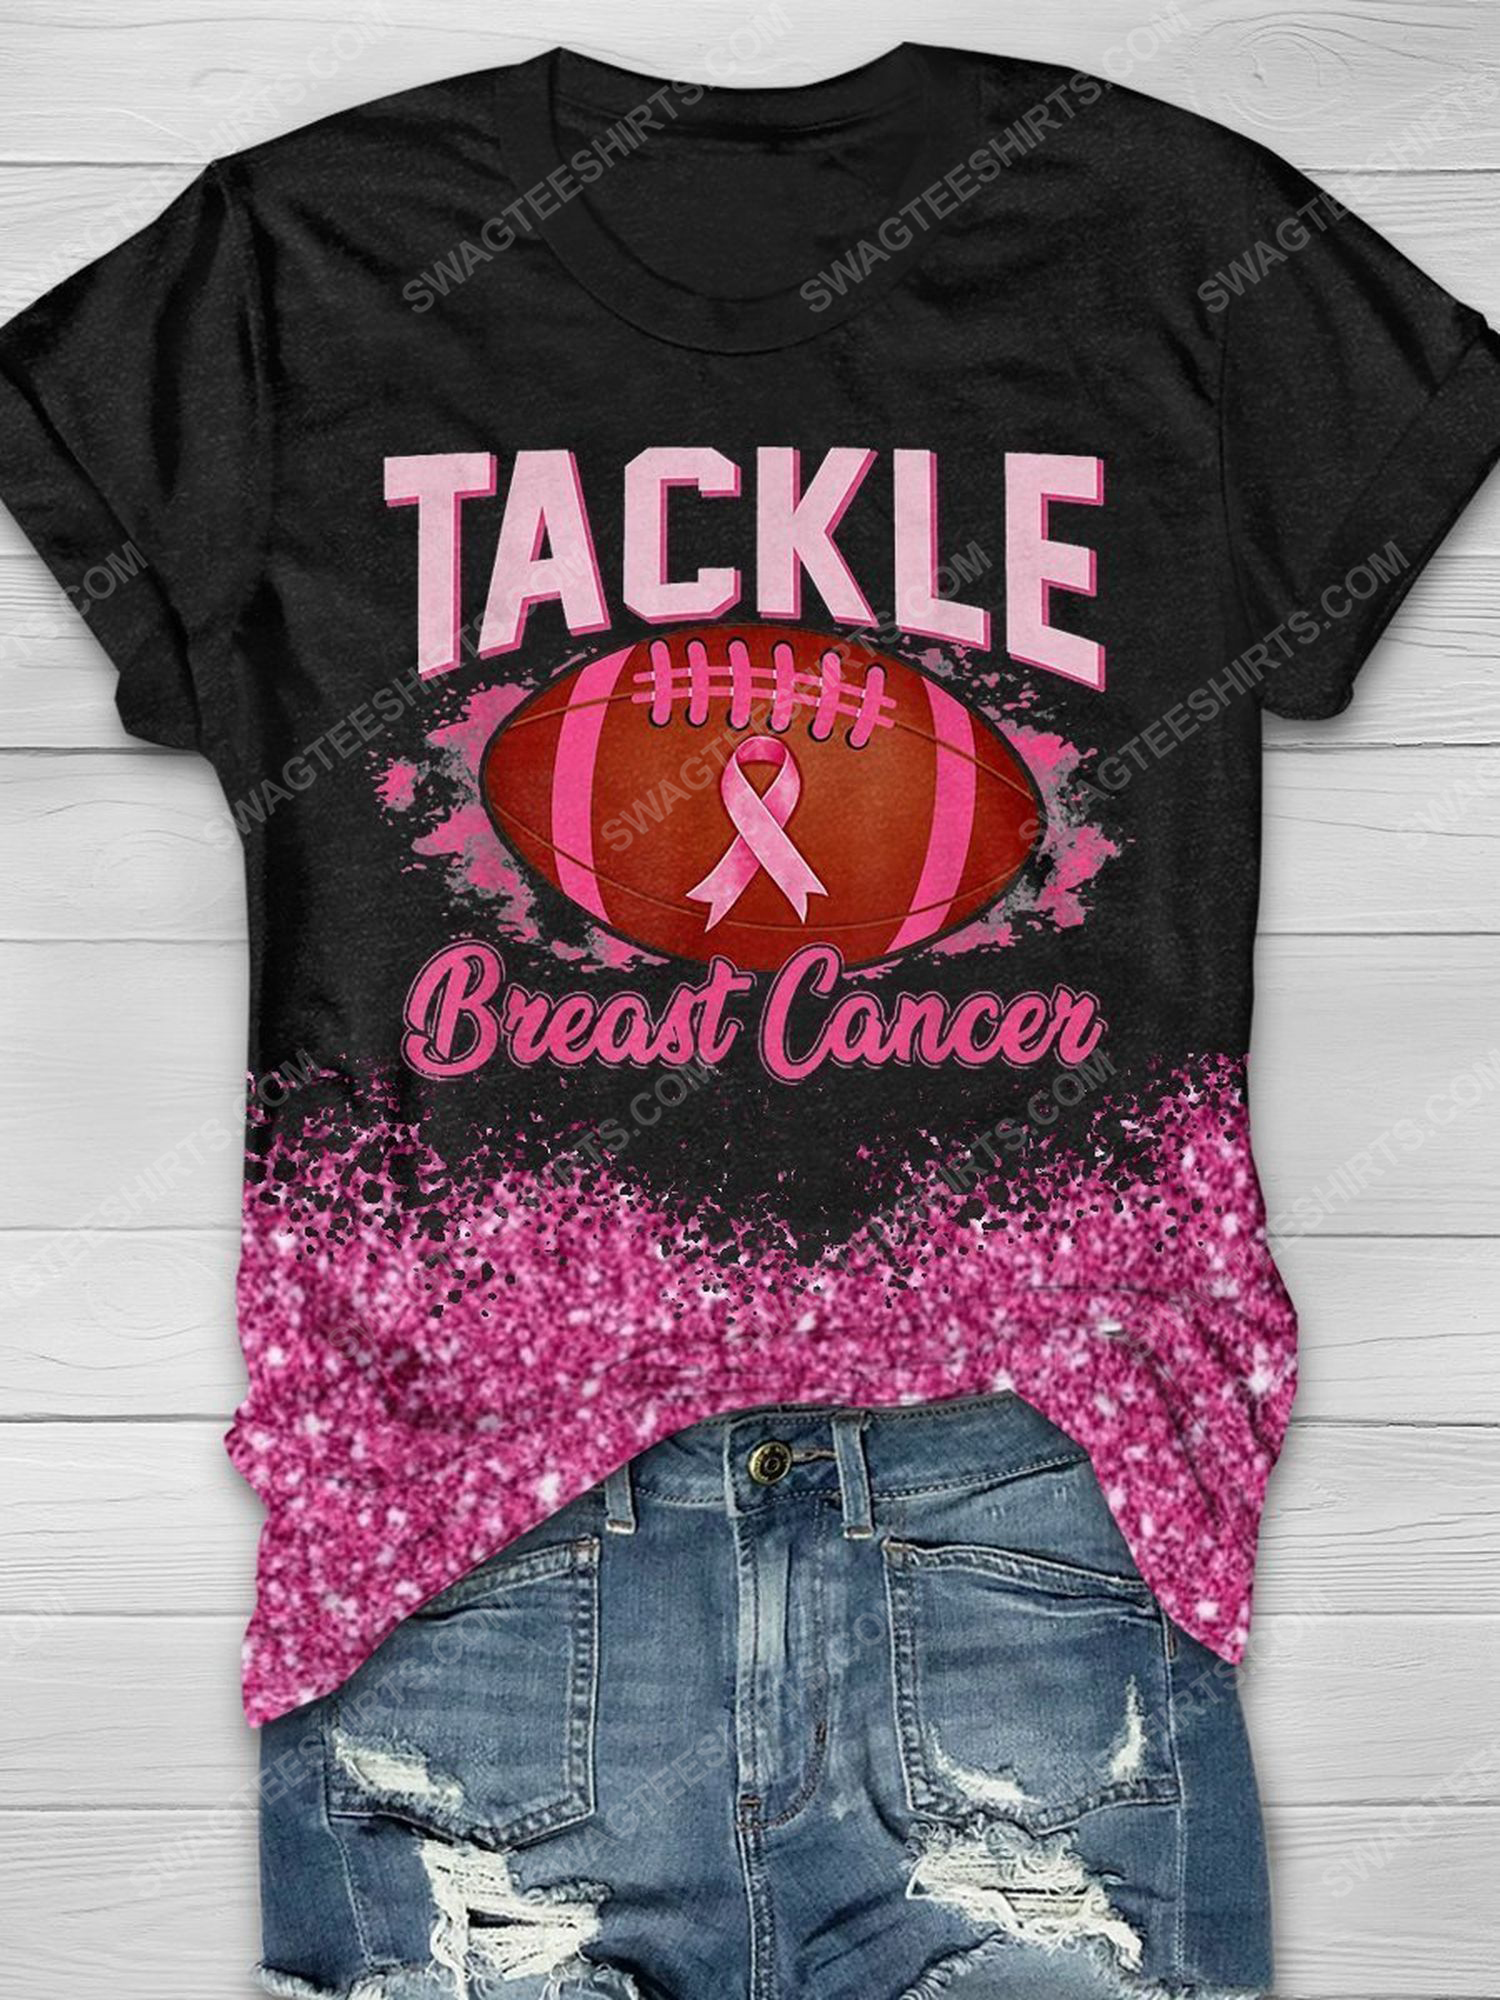 Breast cancer awareness tackle football breast cancer full print shirt 1 - Copy